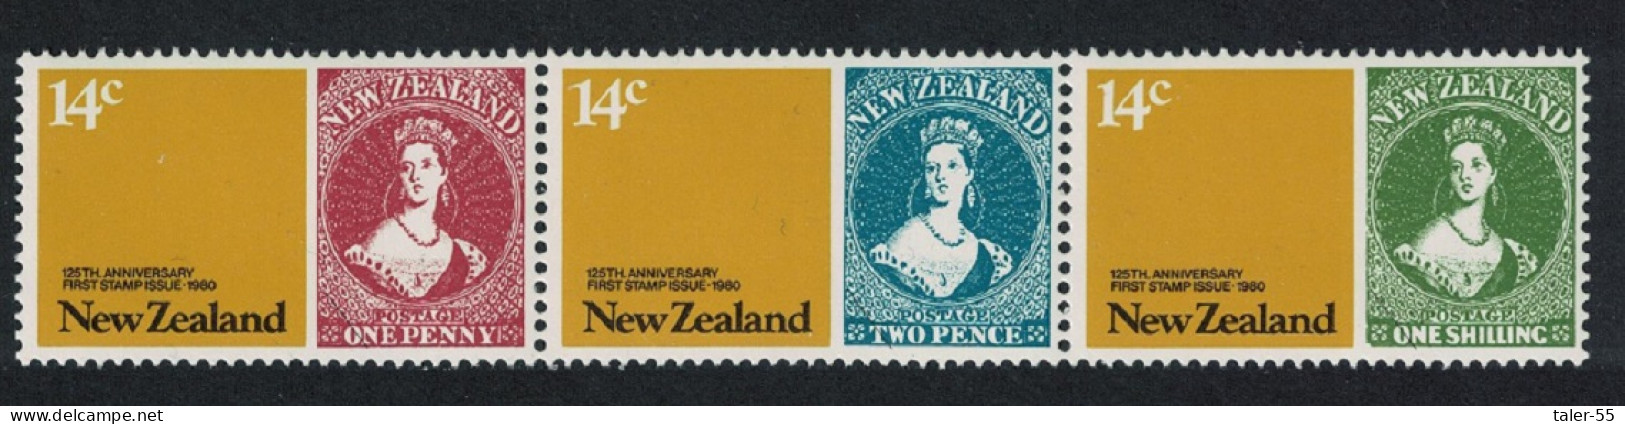 New Zealand 125th Anniversary Of Stamps Strip Of 3v 1980 MNH SG#1210-1212 - Unused Stamps